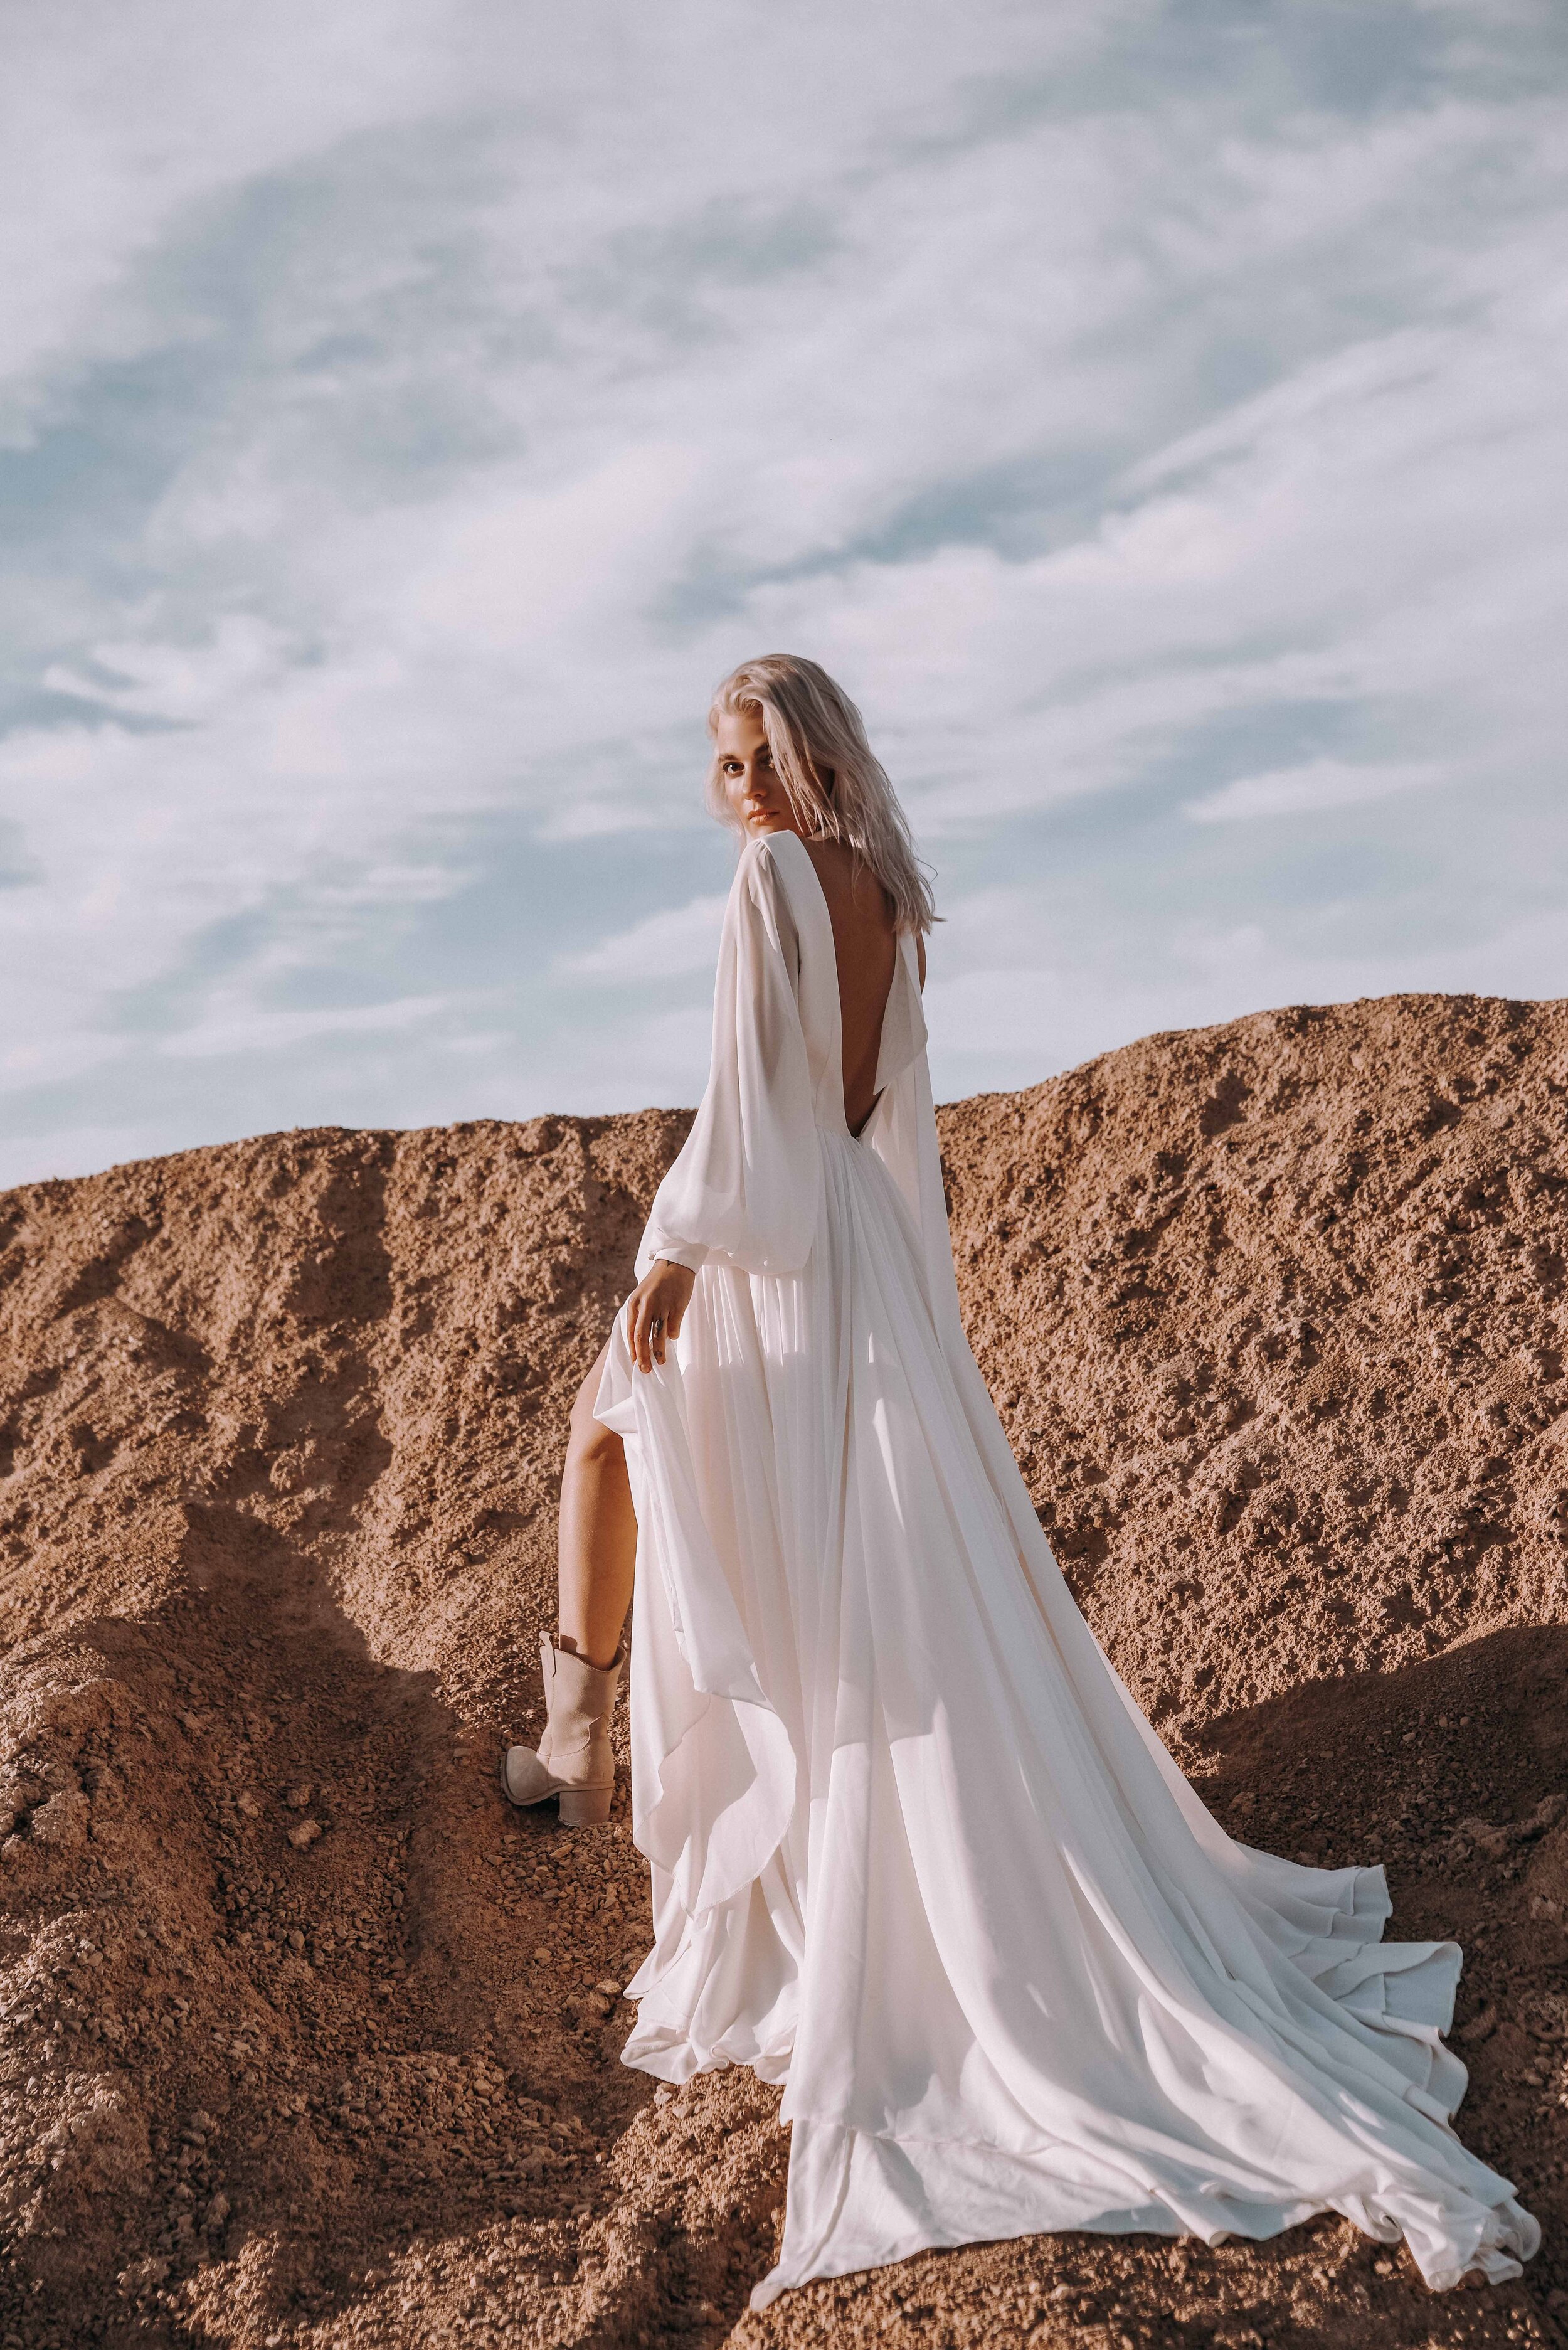 16 Unique Wedding Dresses For The Daring Bride - The Glossychic